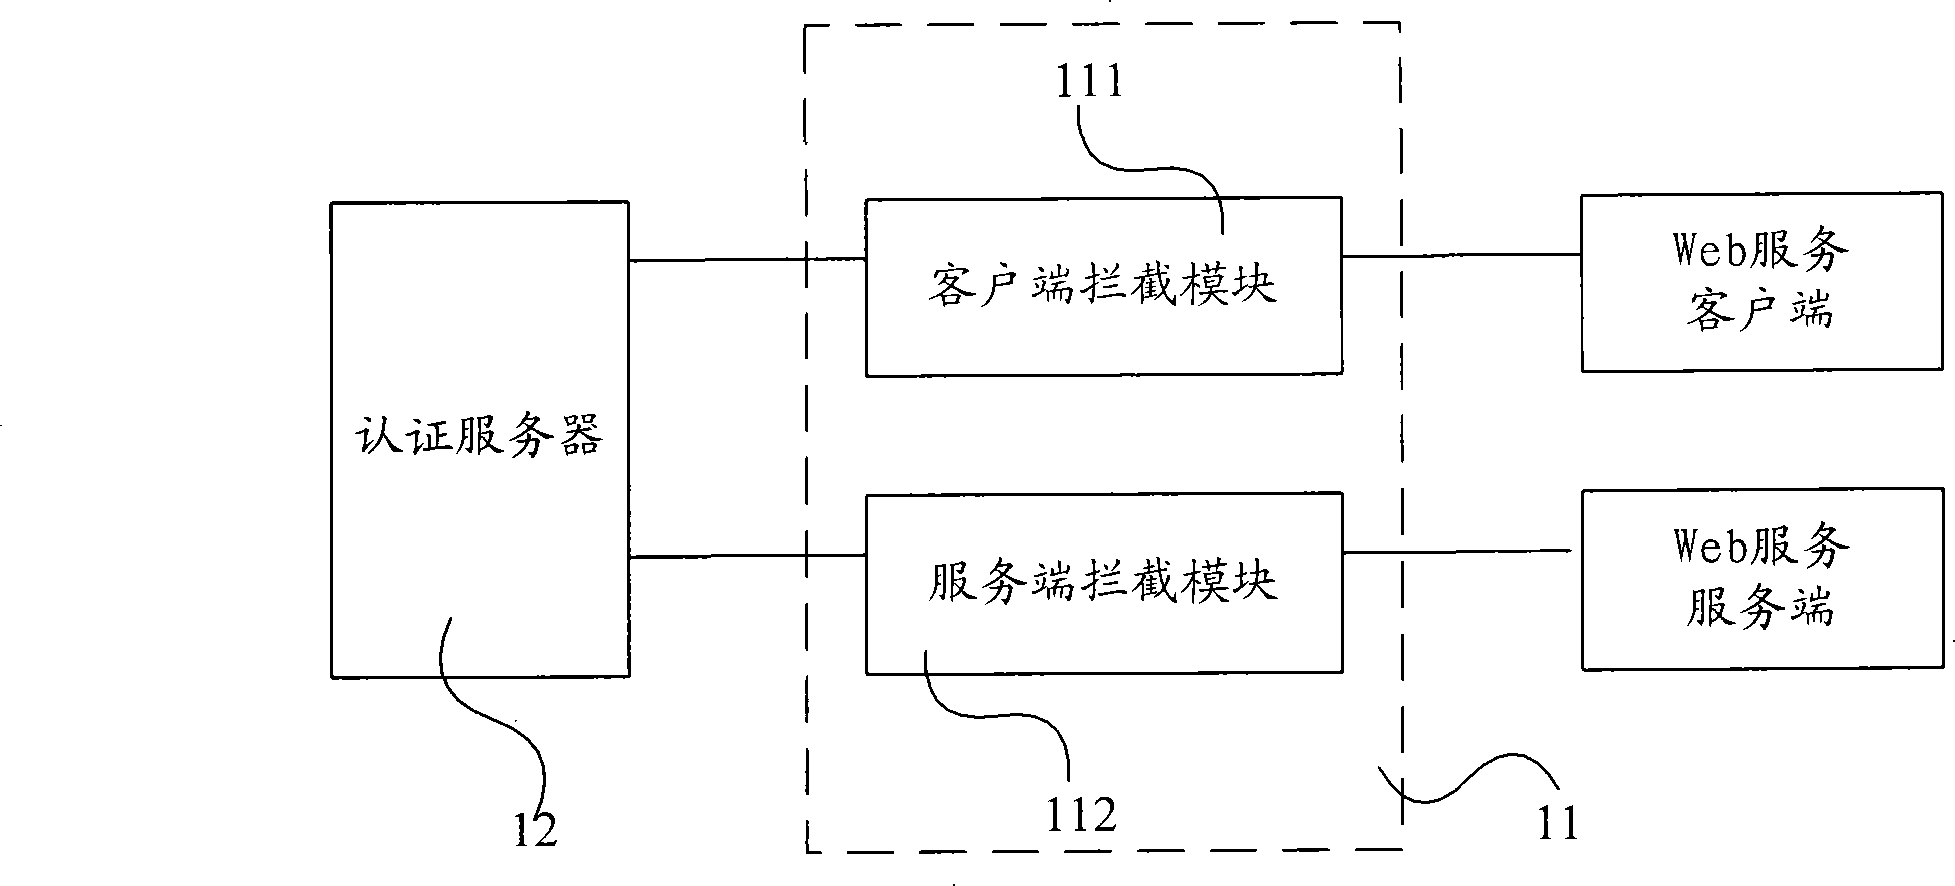 Network authentication service system and method